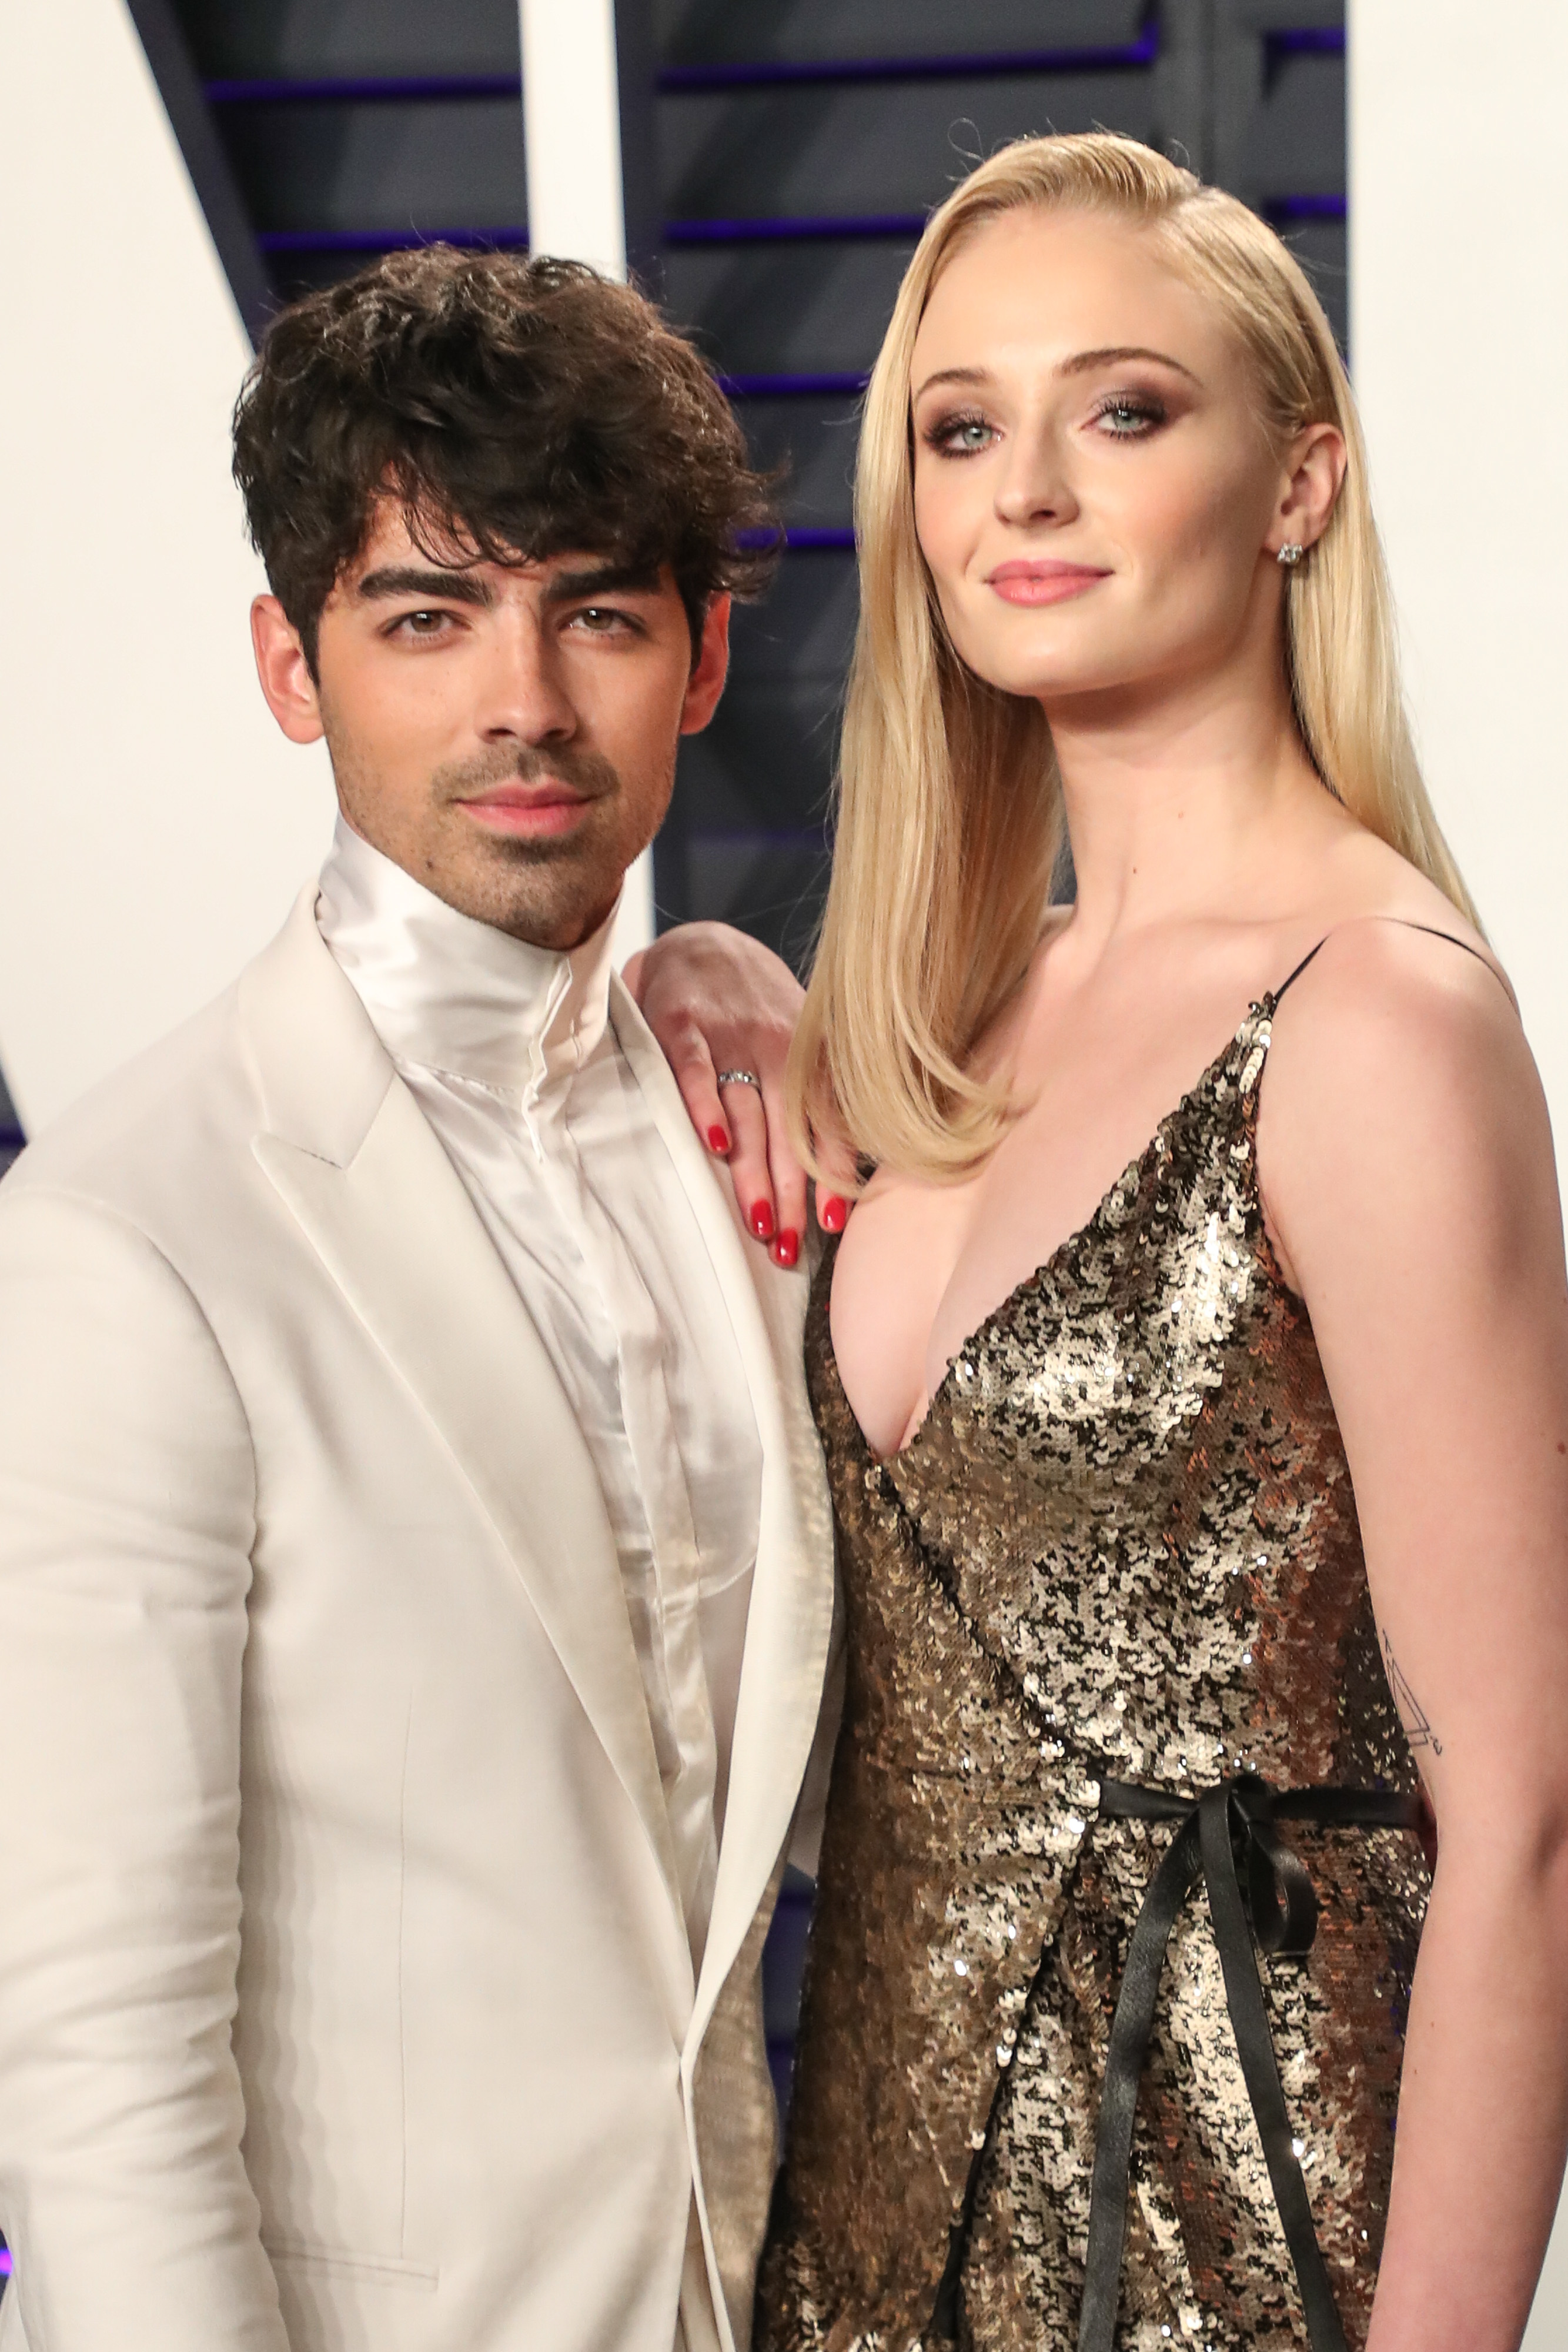 <p><span>"Game of Thrones" actress Sophie Turner was not a fan of <a href="https://www.wonderwall.com/celebrity/profiles/overview/joe-jonas-1225.article">Joe Jonas</a>'s band before she fell for the singer and </span><a href="https://www.wonderwall.com/celebrity/couples/joe-jonas-sophie-turner-married-las-vegas-wedding-celeb-love-life-news-early-may-2019-hollywood-romance-report-3019429.gallery">married him</a><span>. "There was this band in the U.K. called Busted. They had a hit called 'Year 3000.' It was amazing, and [my friends and I] were huge Busted fans. Then the Jonas Brothers covered the song and made it massive. And Busted broke up. We thought it was all the Jonas Brothers' fault. So we hated them," she told ELLE magazine in 2020. </span></p><p>Then in 2016, a producer on one of her films who'd once lived next door to the JoBros told her, "You should meet <a href="https://www.wonderwall.com/celebrity/profiles/overview/joe-jonas-1225.article">Joe Jonas</a>. I feel like you would really get along with this guy." Shortly after that, "I went to a meeting, and Joe's agent was in the room. And he was like, 'You remind me of one of my clients. I bet you two would really hit it off,'" she recalled.</p><p>Later that year, Sophie told ELLE, Joe sent her a DM on Instagram out of the blue -- he was going to be in Britain and wanted to meet up. "When I told my friends, they were like, 'That's hilarious. You have to do it! And you have to text us everything he says,'" she said. "I expected him to show up with security and everything. I thought, 'He's gonna be such a d***,'" she told ELLE. "I brought all my guy friends to come with me to meet him, because in the back of my mind I still worried that he could be a catfish -- or I don't know what. I just wanted my guy friends with me. I had my rugby boys. I was safe." </p><p>They met at a bar in London's Camden area and Joe didn't bring security -- just a friend -- "and they drank just as hard as the rest of us," Sophie recalled. "I remember the two of us spending only a couple of minutes on the dance floor, and then we just found a space far in the corner and we just talked. We talked for hours and hours and hours. And I was, like, not bored. It wasn't contrived. It wasn't small talk -- it was just so easy. And soon we were, like, inseparable. I went on tour with him." </p><p>They then got engaged on their one-year anniversary in 2017, wed in 2019 and welcomed two daughters before things went south in 2023 and Joe filed for divorce.</p>